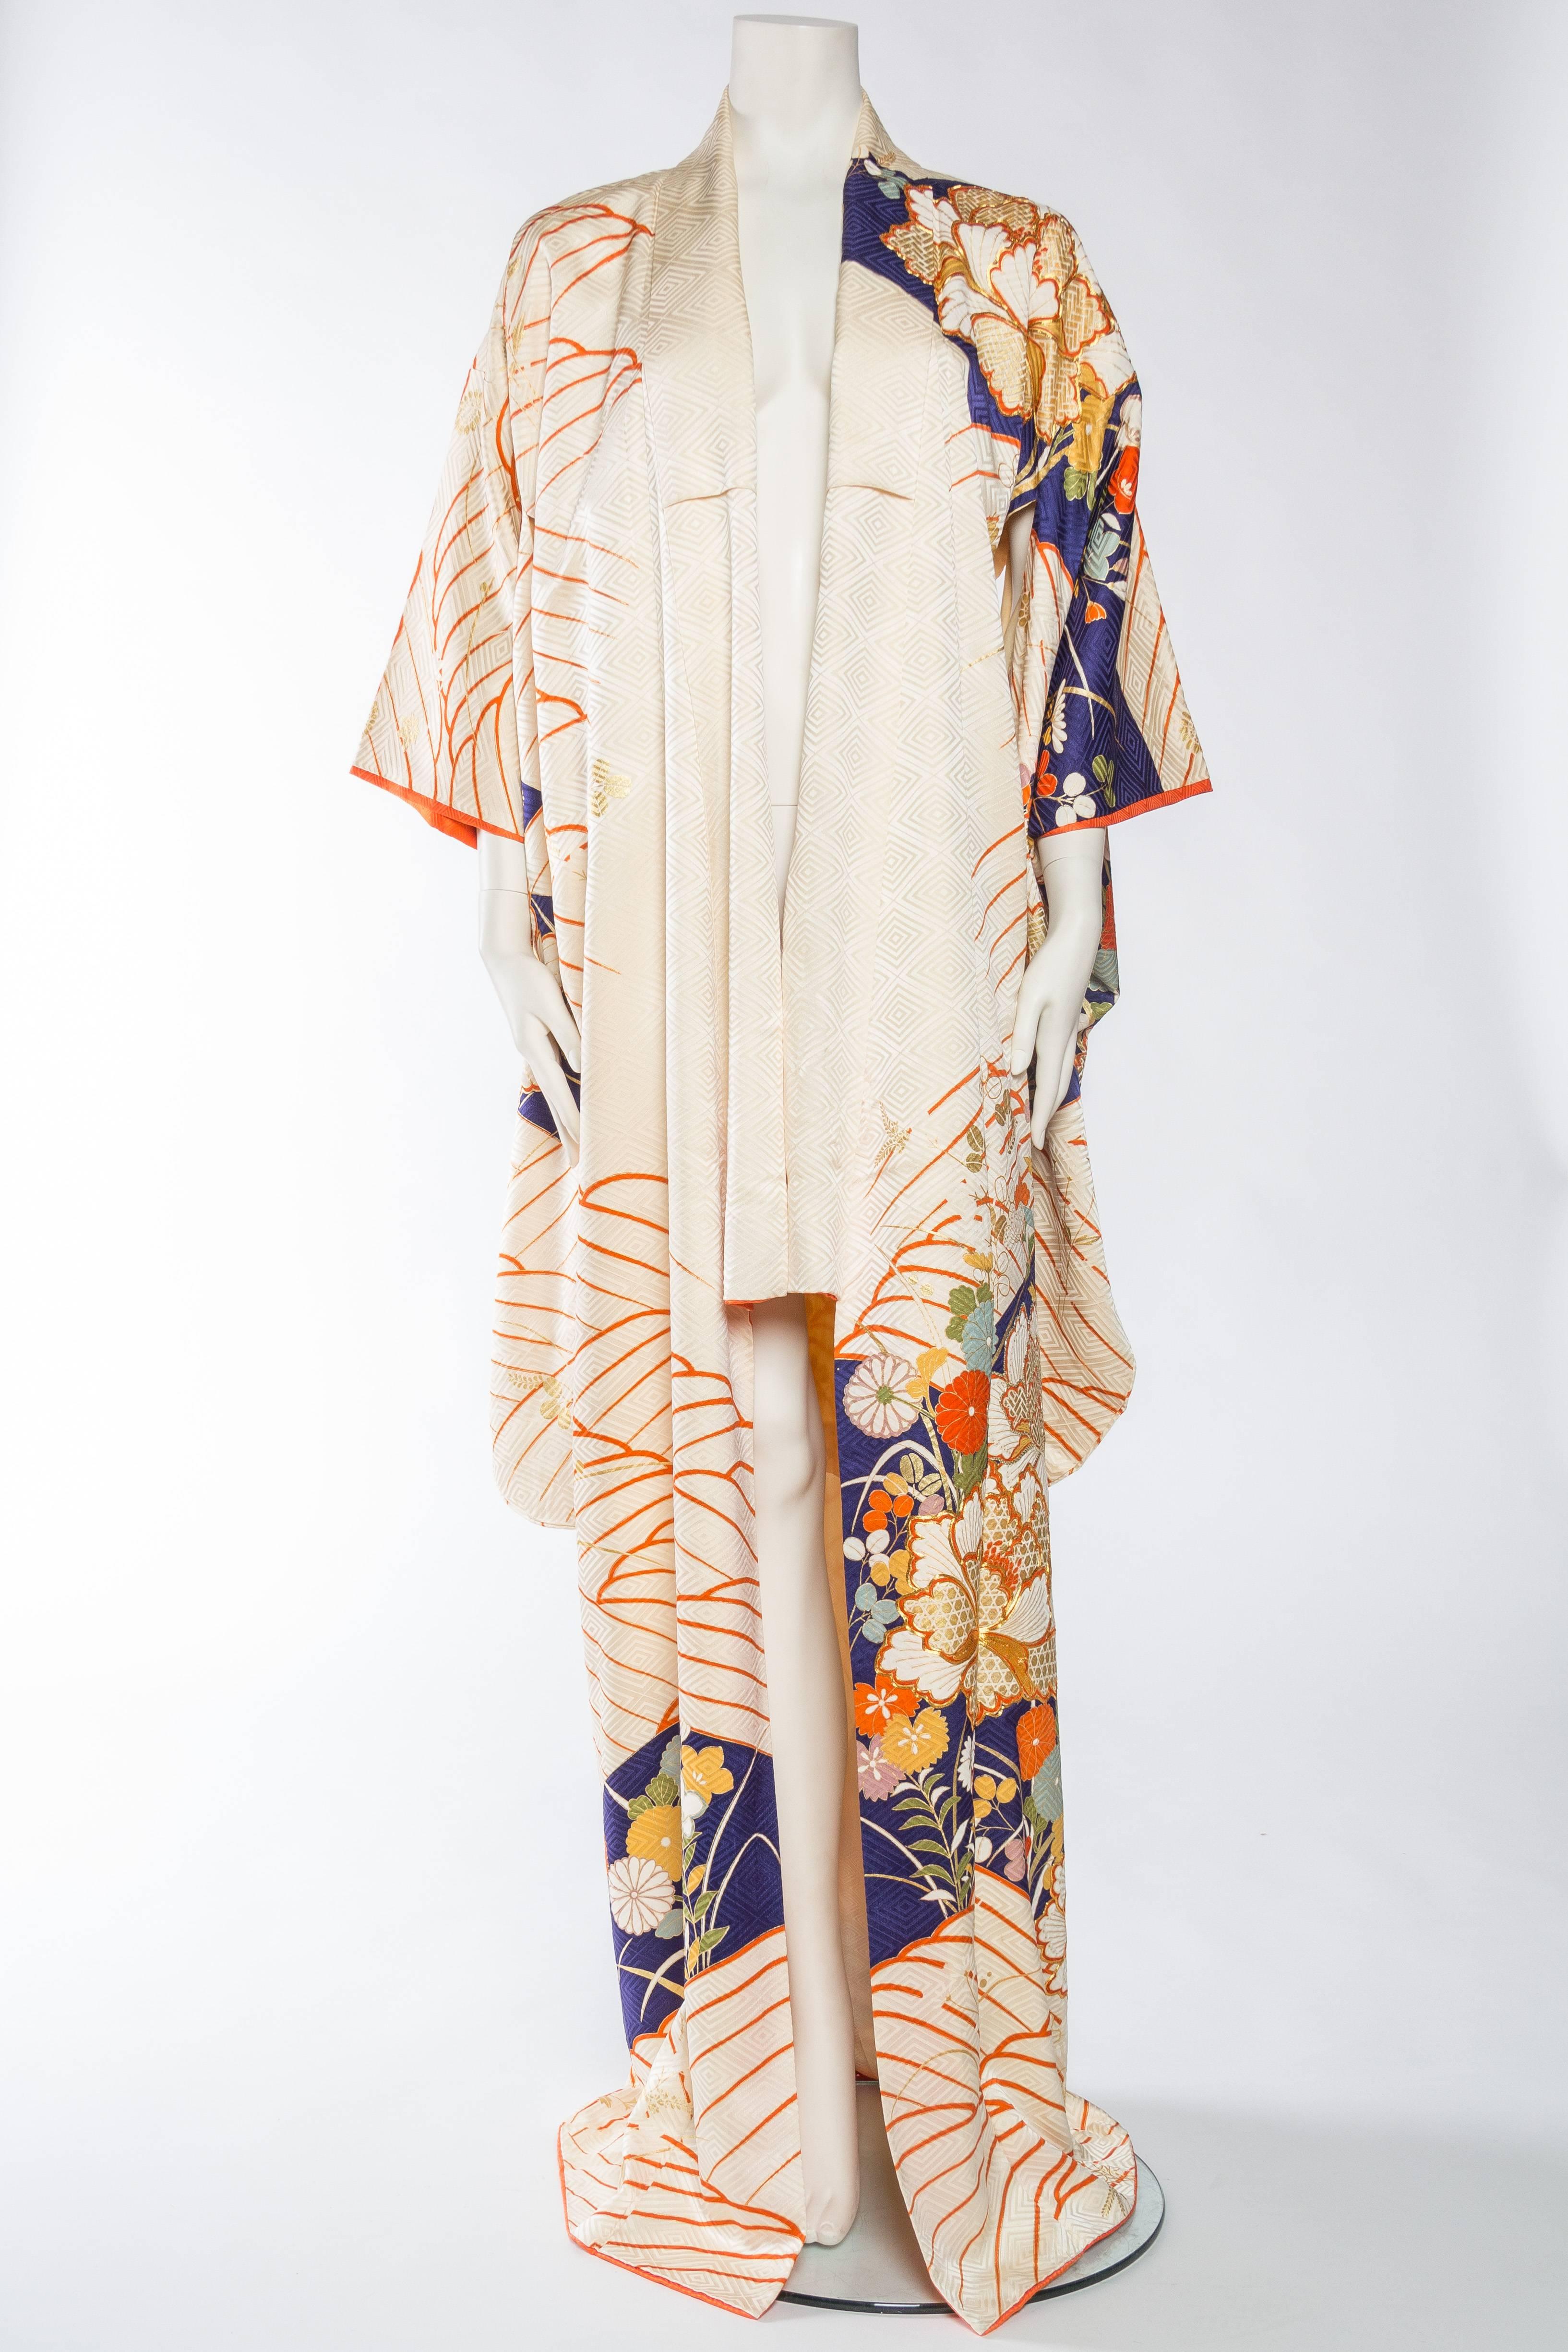 There is wonderful movement to the design of this kimono. Hand embroidered and foil printed gold flowers dance upon the orange waves with large clusters of flowers showcased here and there with even further gold embellishment. A wonderful garden on